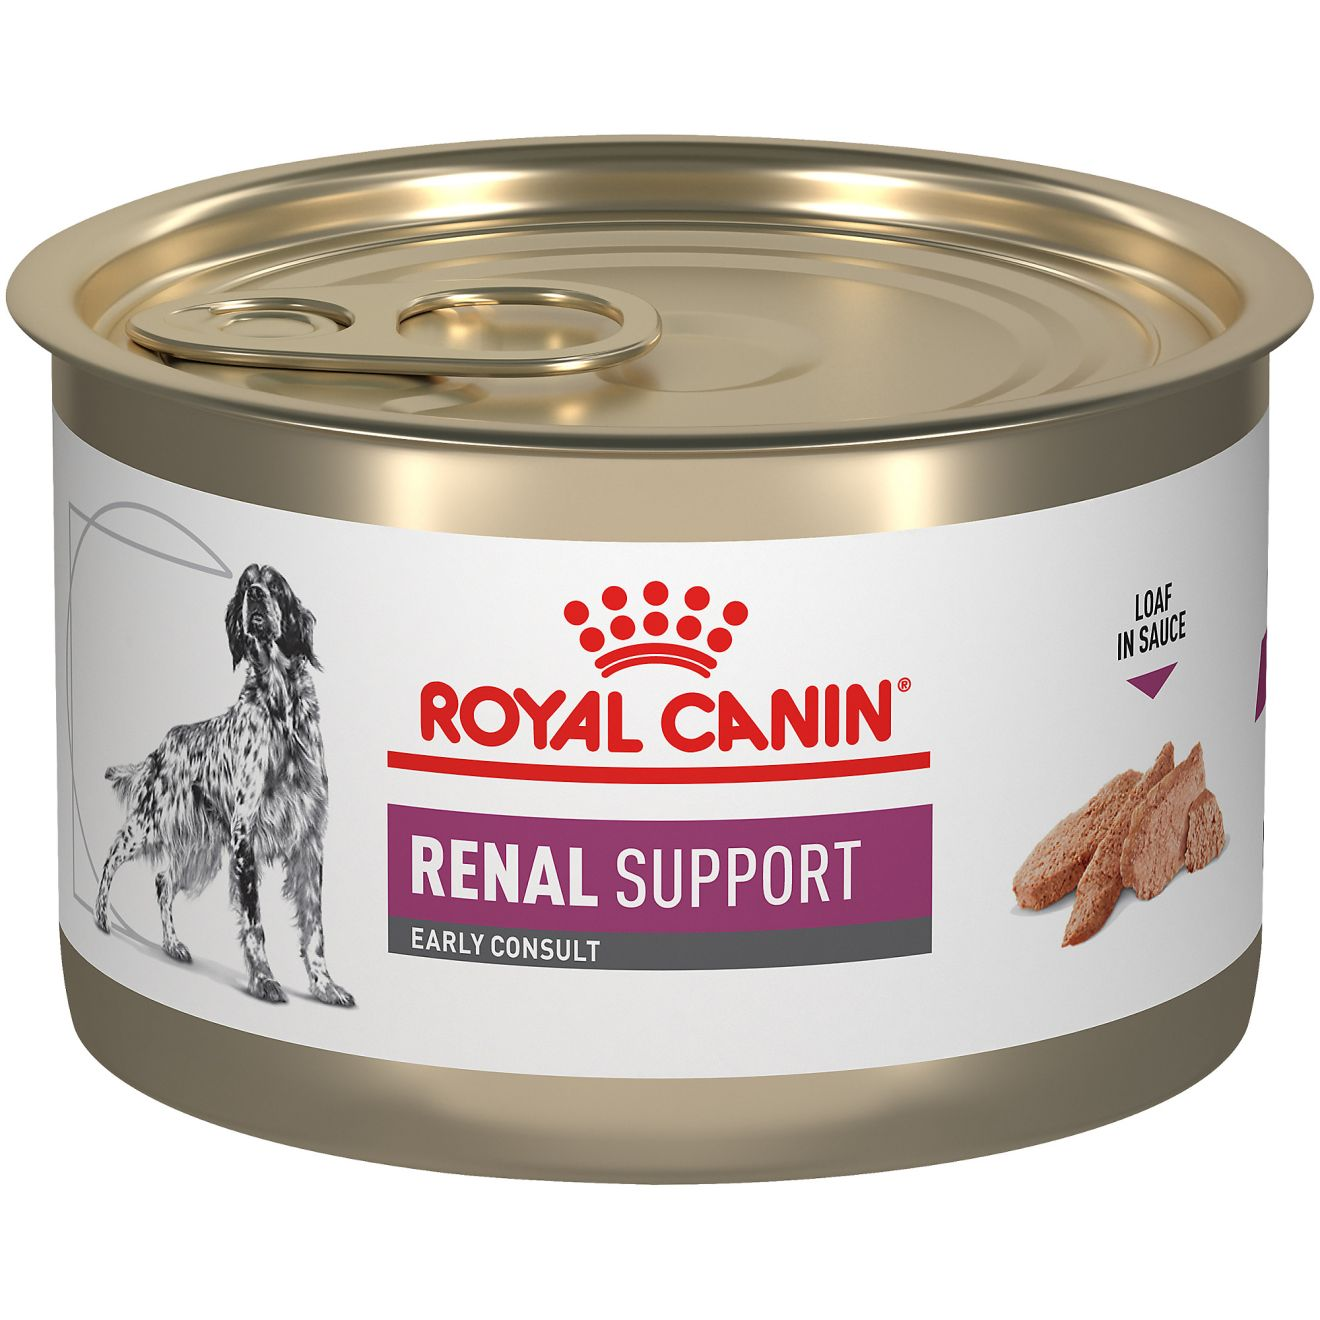 Canine Renal Support Early Consult loaf in sauce